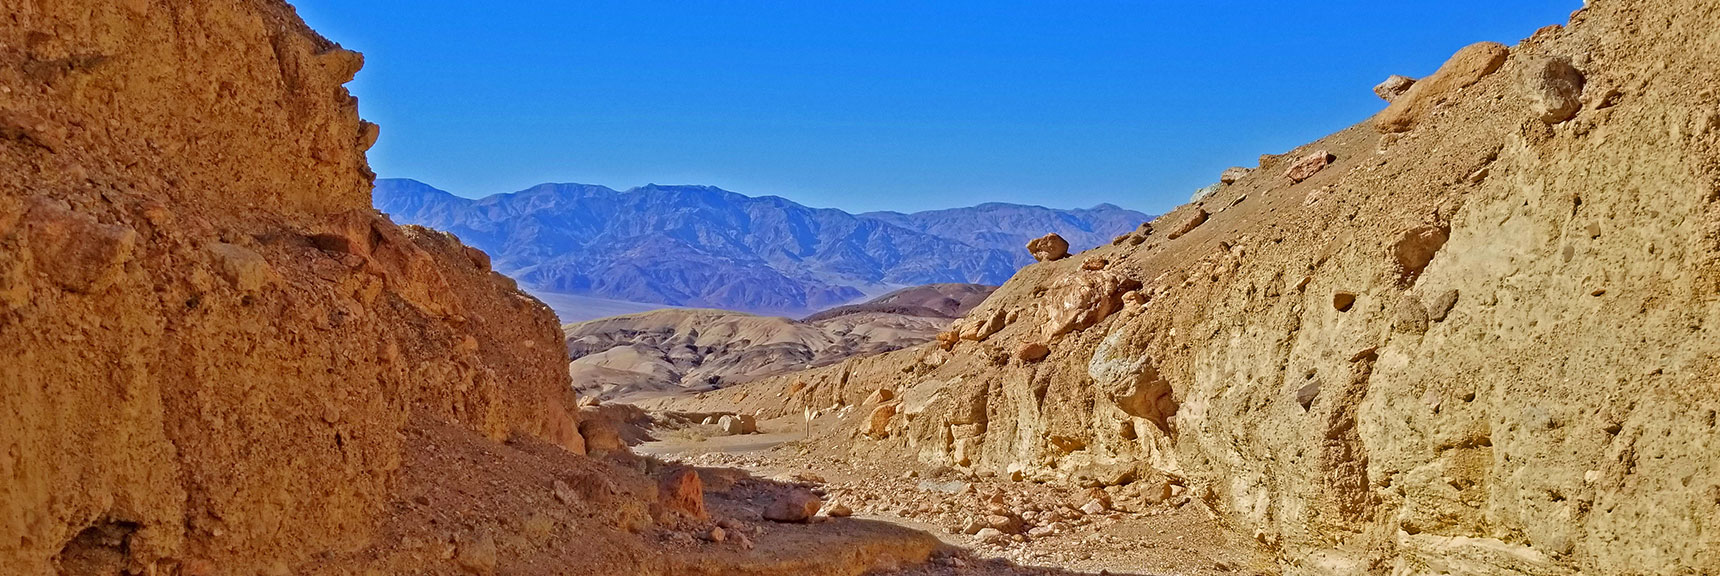 View Out the Opening of First Dip Canyon | Artists Drive Hidden Canyon Hikes | Death Valley National Park, California